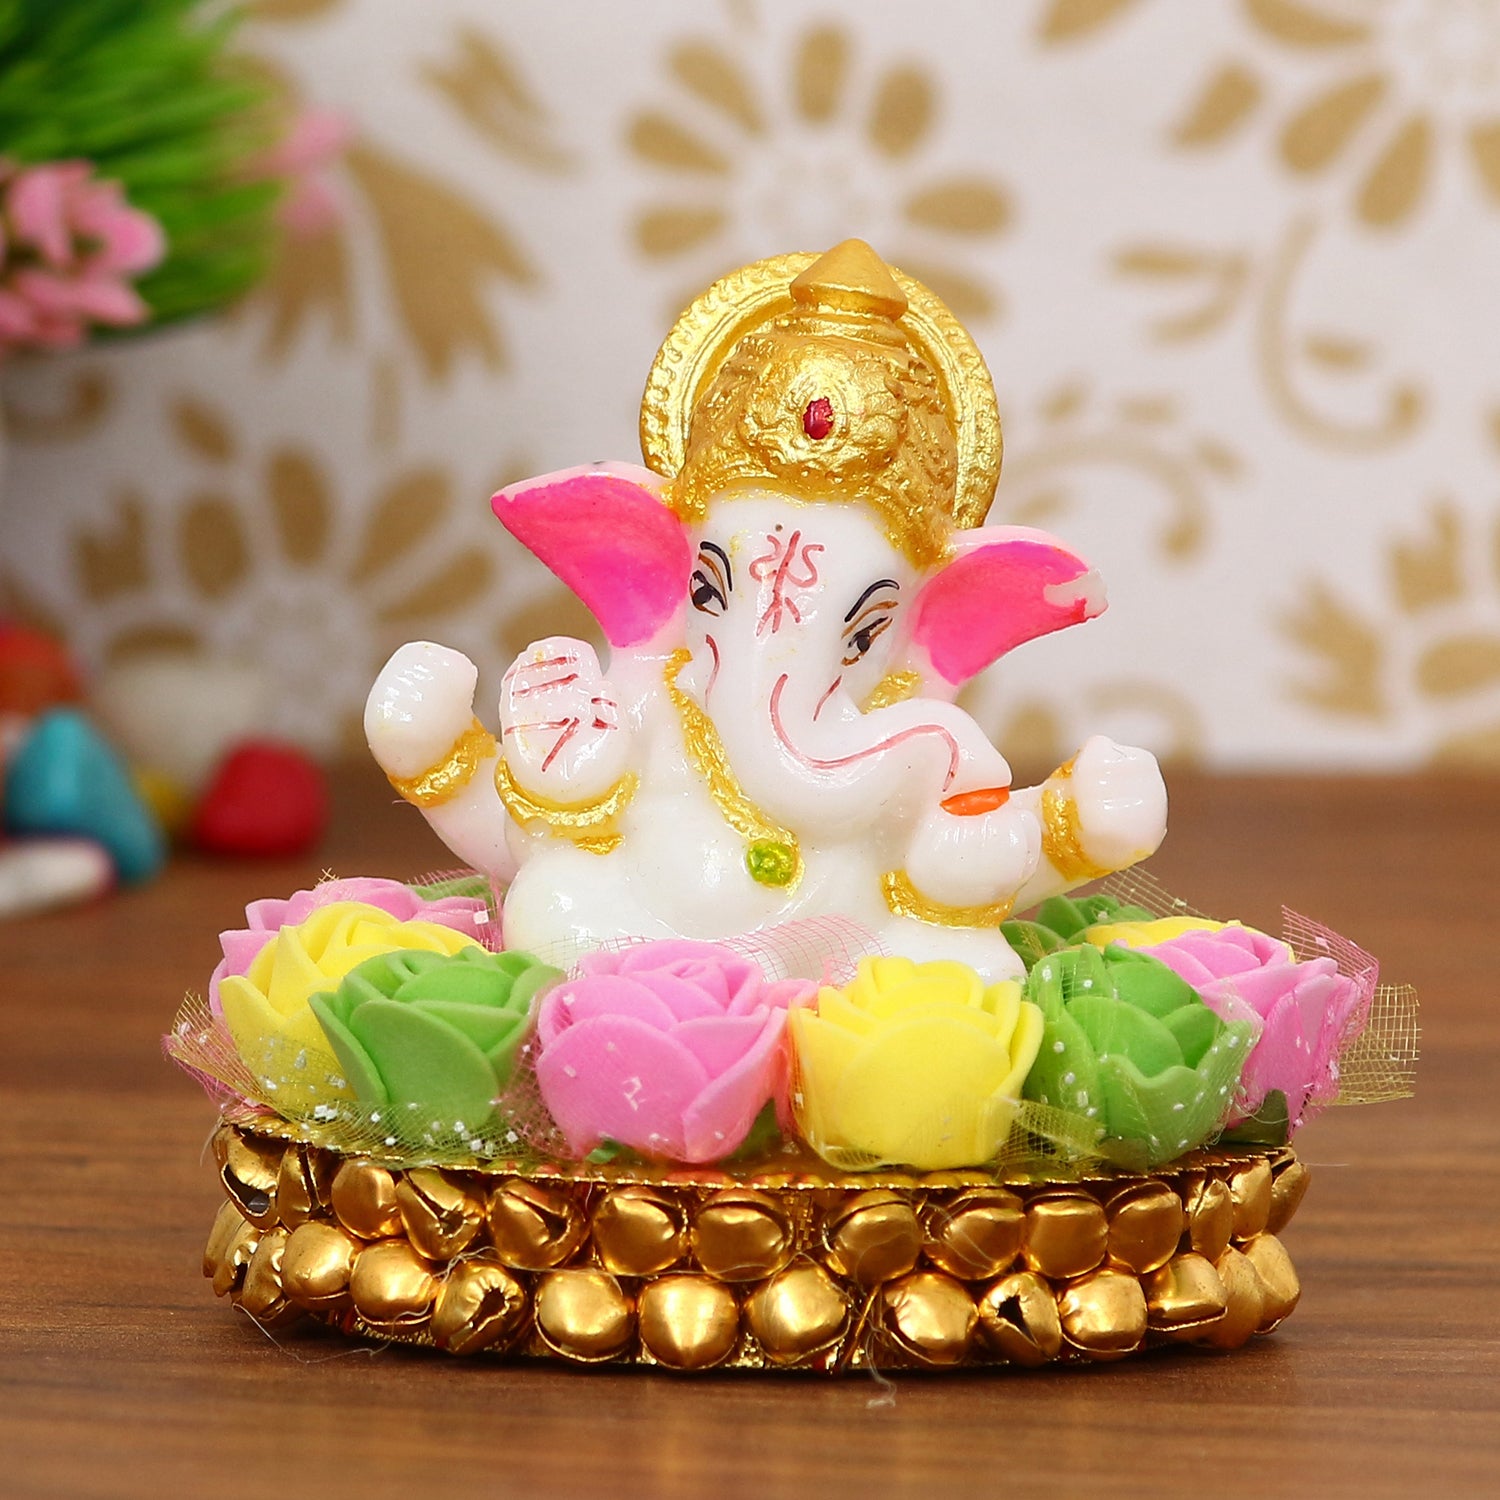 Polyresin Lord Ganesha Idol on Decorative Handcrafted Plate with Colorful Flowers